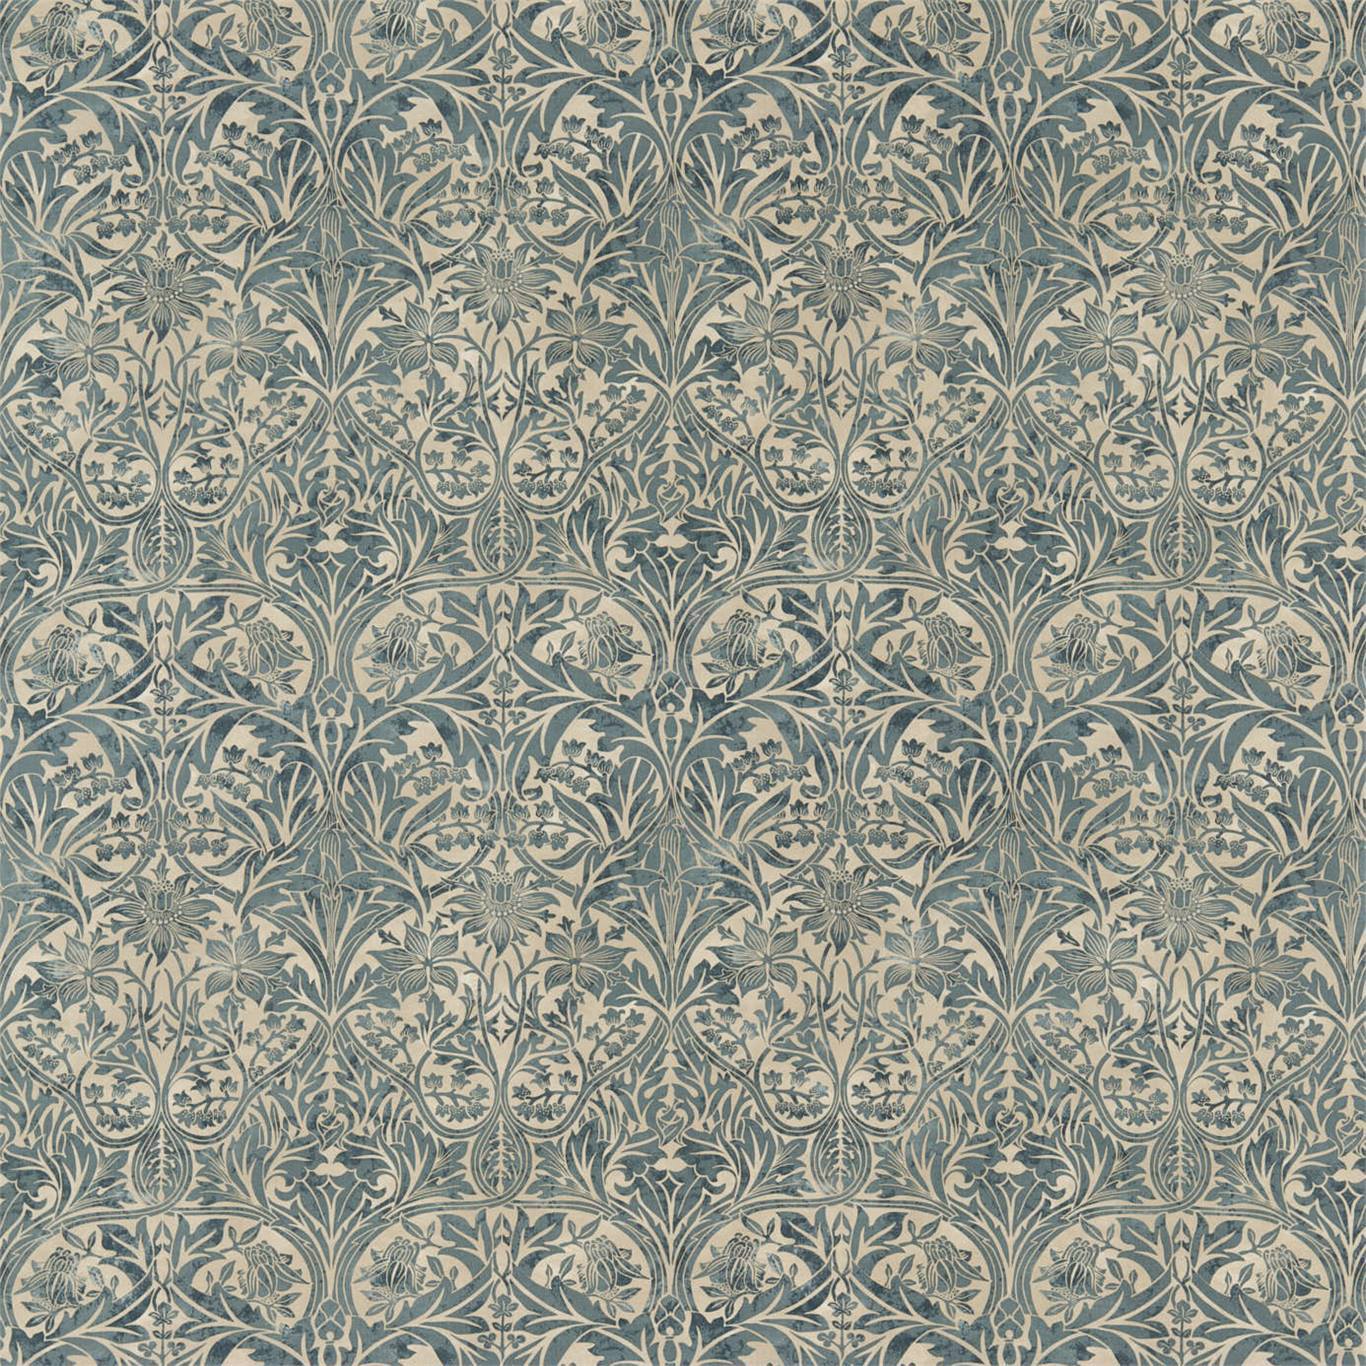 Bluebell Fabric by Morris & Co. - DCMF226721 - Seagreen/Vellum